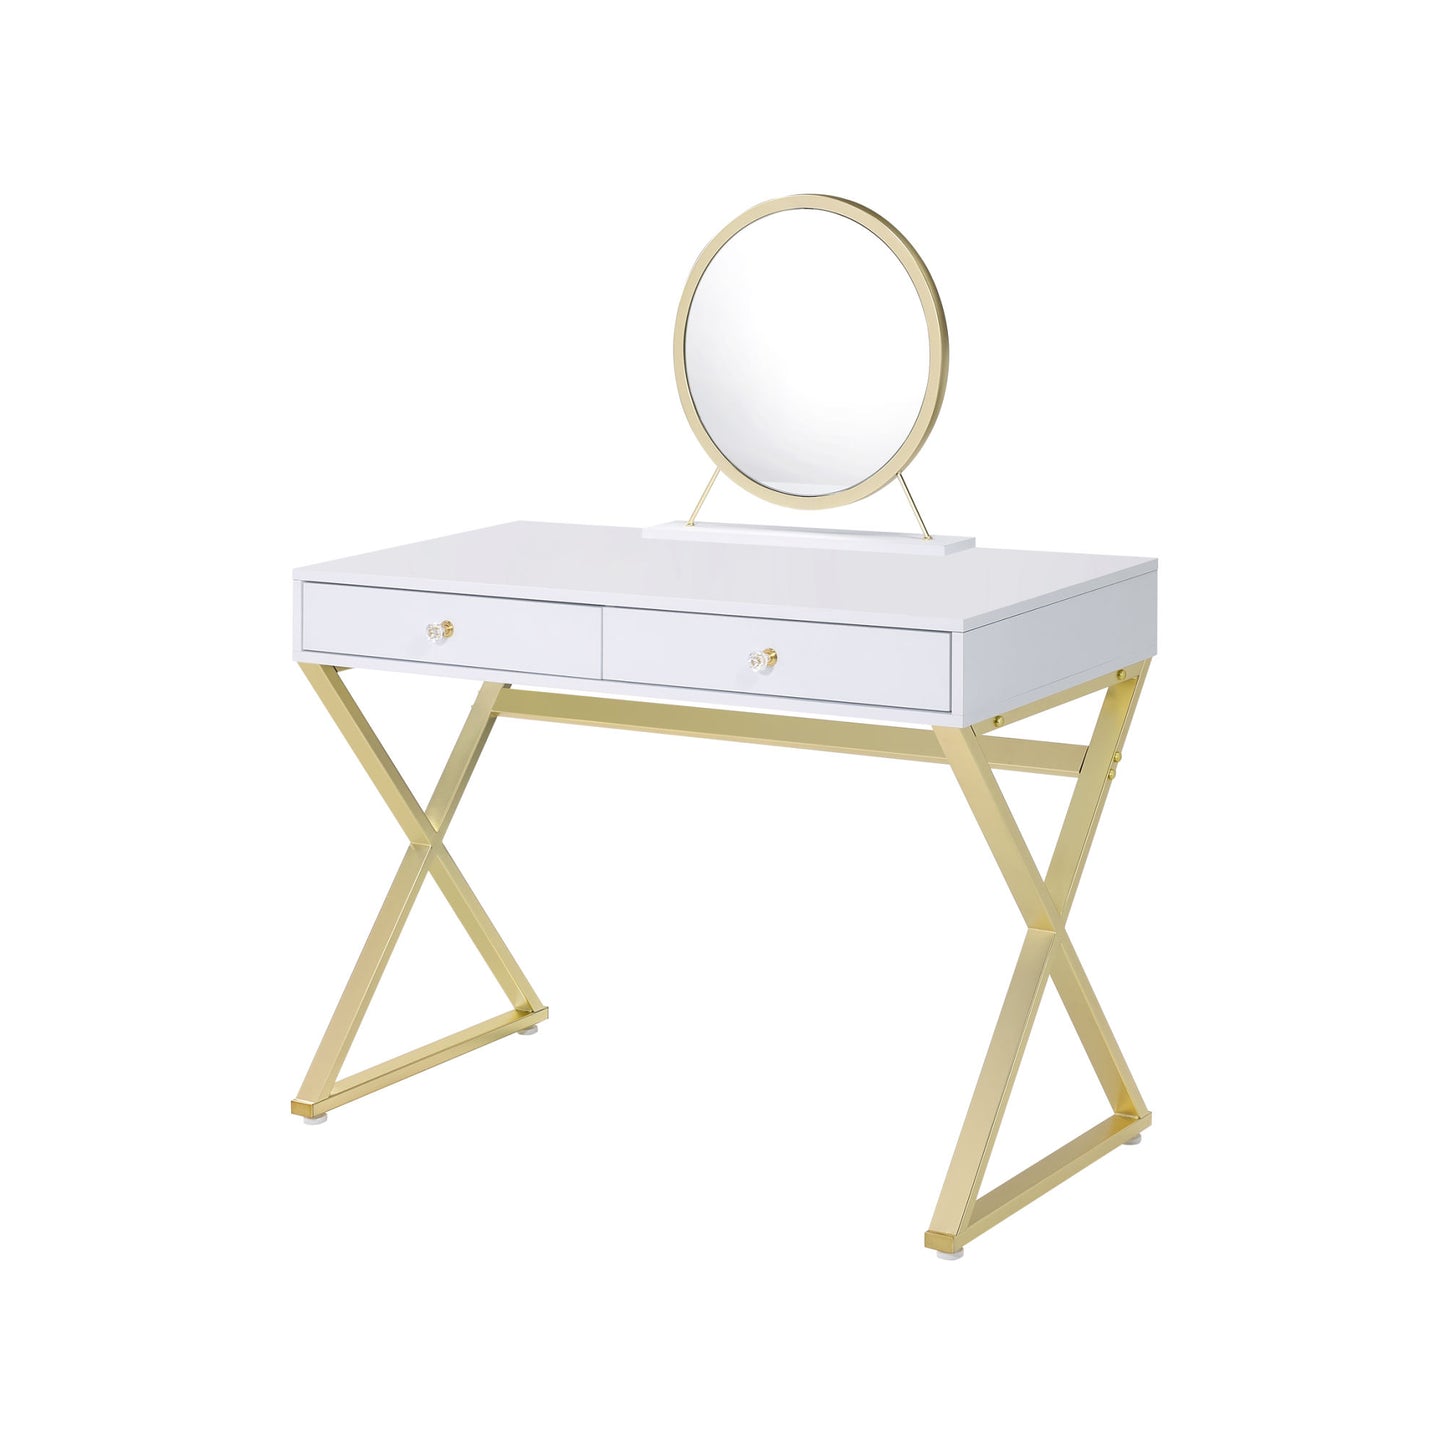 ACME Coleen Vanity Desk w/Mirror & Jewelry Tray in White & Gold Finish AC00667 - lolaluxeshop